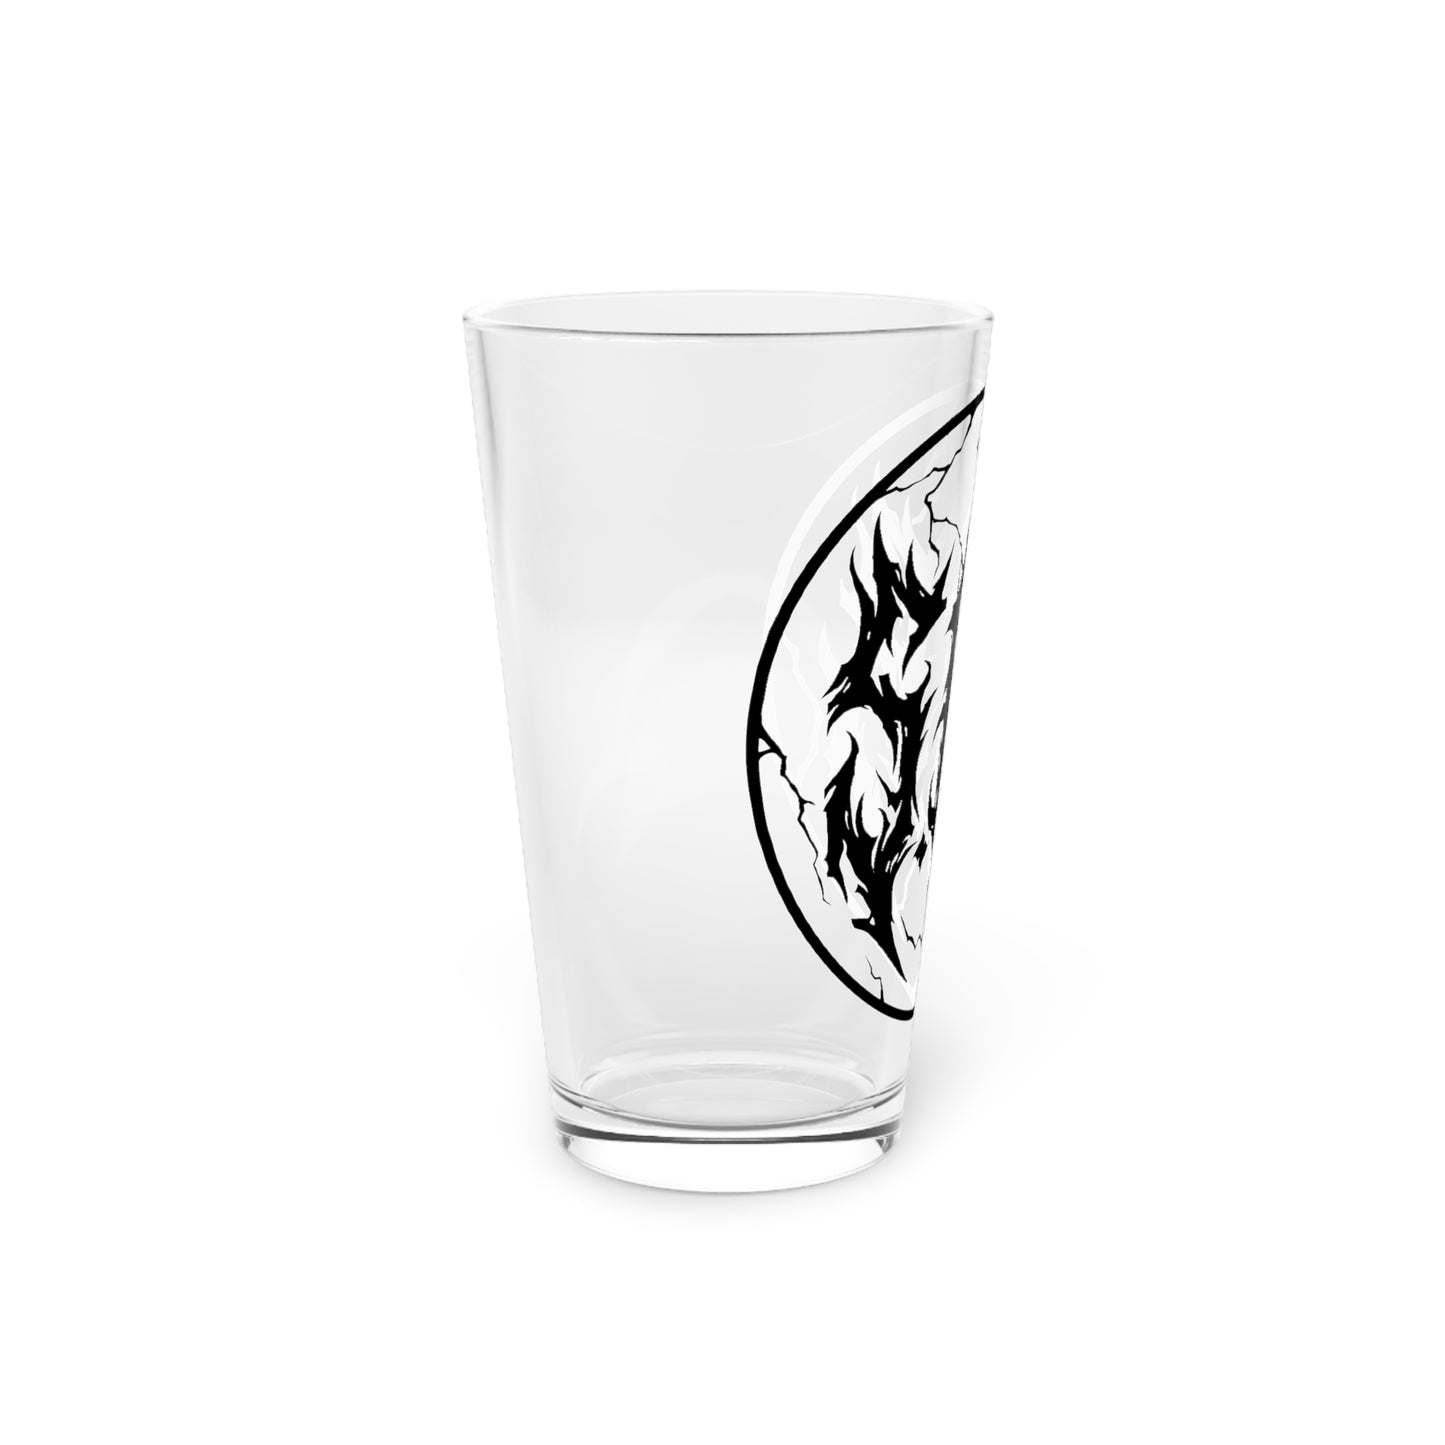 Shattered Earth Drinking glass